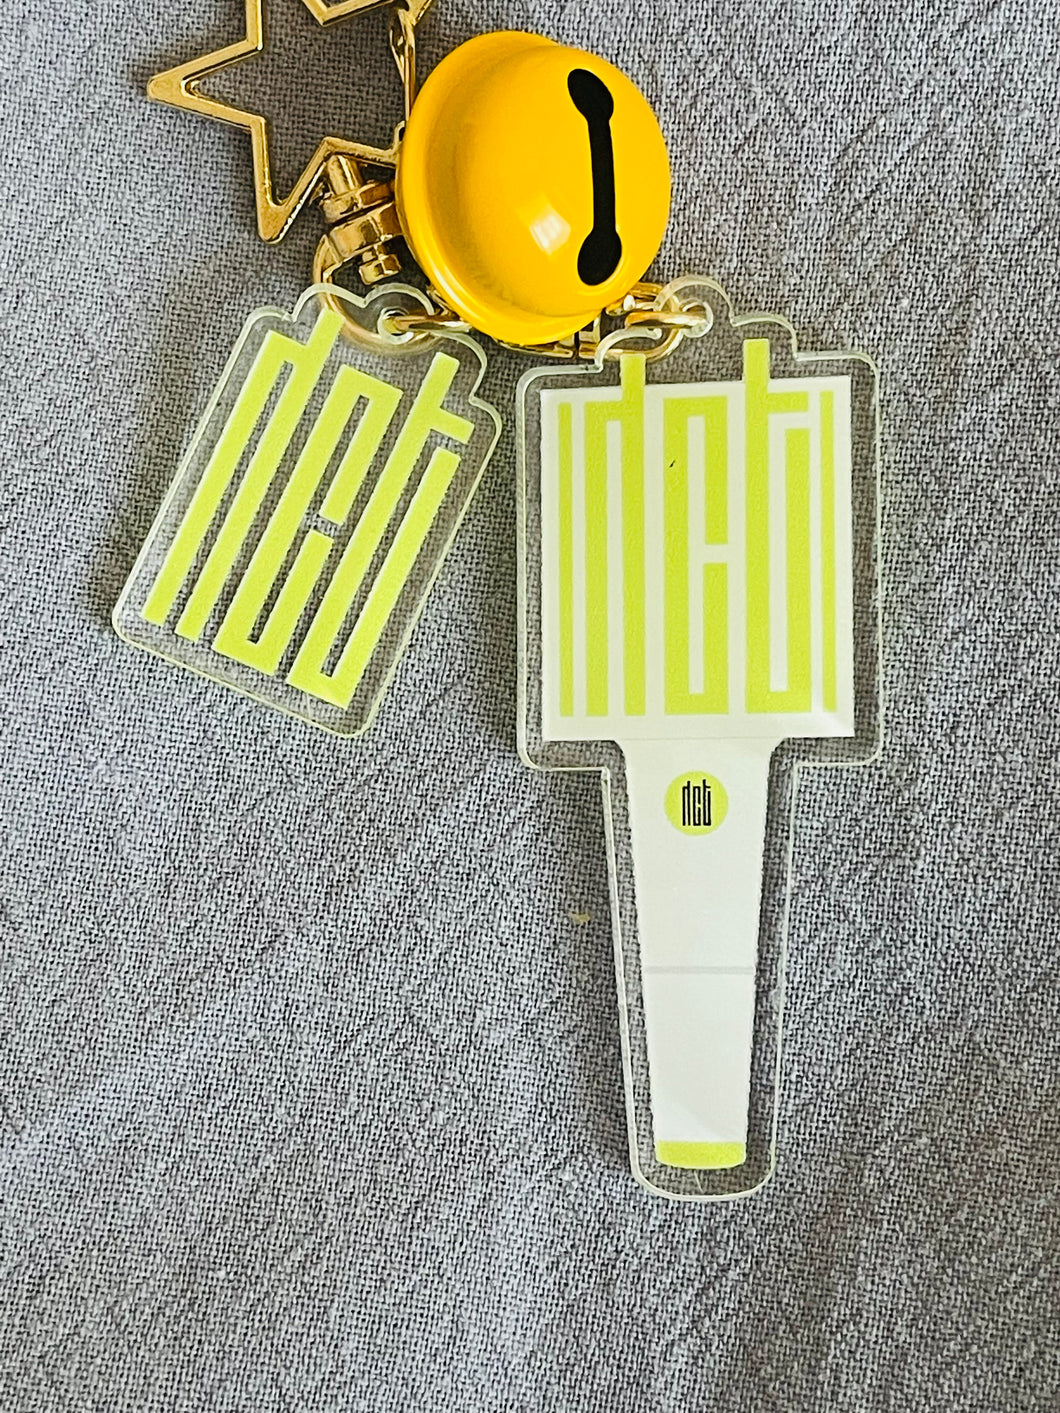 3 in 1 Various kpop groups light stick keychains